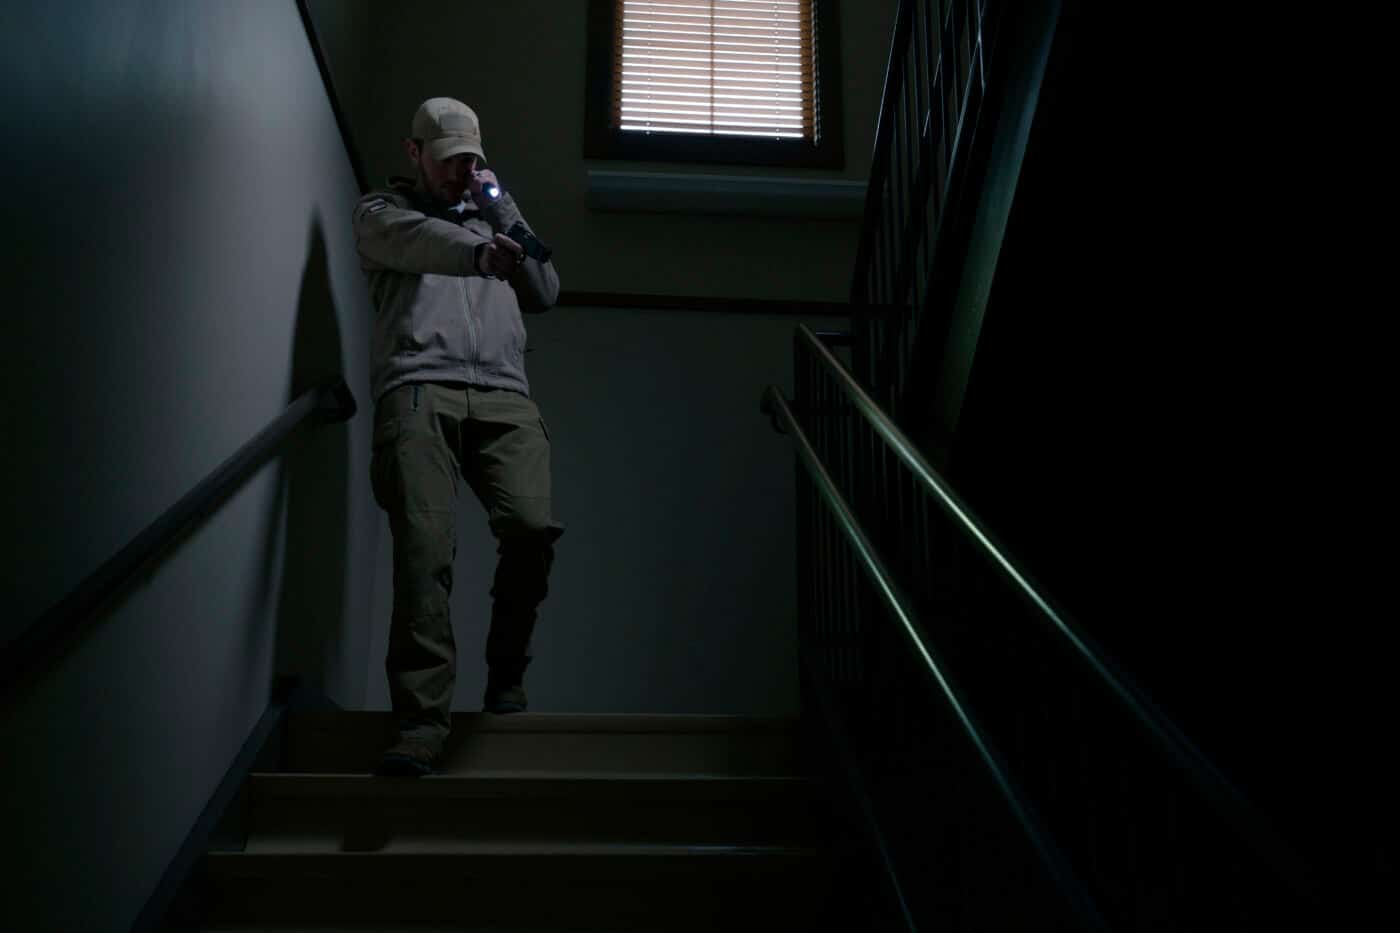 Man carrying a pistol and handheld light in a dark stairwell